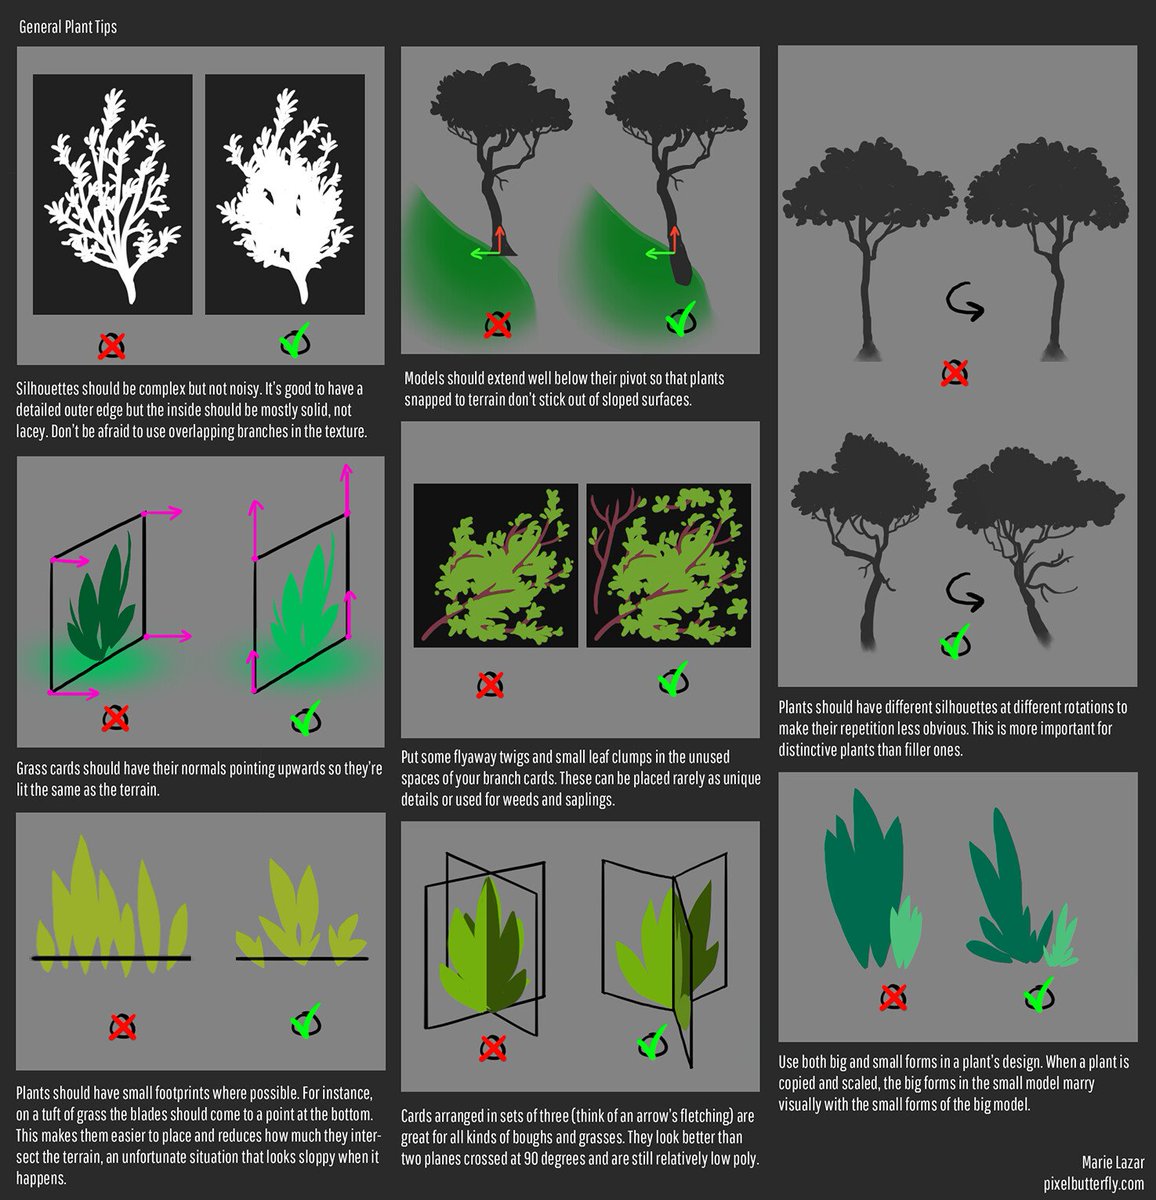 Sharing this beautiful breakdown by the amazing @pixelbutterfly! Foliage is my Achilles heel, I can barely make PS1 style grass, but after @LuizaTanaka explained the SpeedTree workflow, I'm sold :) Time to learn it. These tips are golden :)